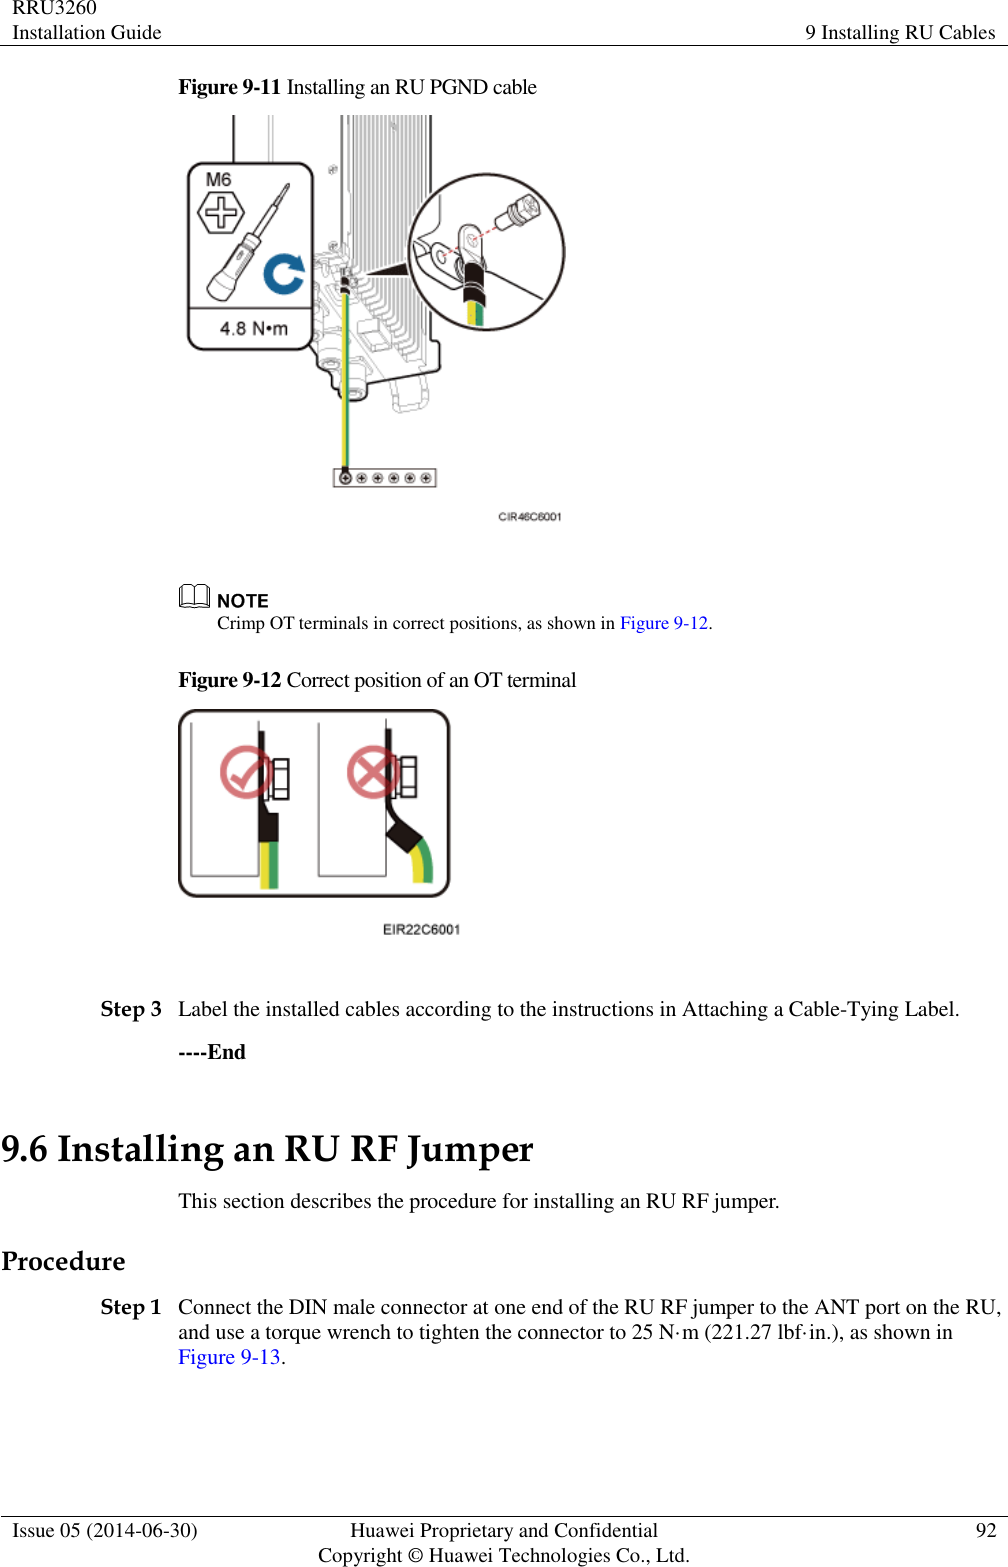 RRU3260 Installation Guide 9 Installing RU Cables  Issue 05 (2014-06-30) Huawei Proprietary and Confidential                                     Copyright © Huawei Technologies Co., Ltd. 92  Figure 9-11 Installing an RU PGND cable    Crimp OT terminals in correct positions, as shown in Figure 9-12. Figure 9-12 Correct position of an OT terminal   Step 3 Label the installed cables according to the instructions in Attaching a Cable-Tying Label. ----End 9.6 Installing an RU RF Jumper This section describes the procedure for installing an RU RF jumper. Procedure Step 1 Connect the DIN male connector at one end of the RU RF jumper to the ANT port on the RU, and use a torque wrench to tighten the connector to 25 N·m (221.27 lbf·in.), as shown in Figure 9-13. 